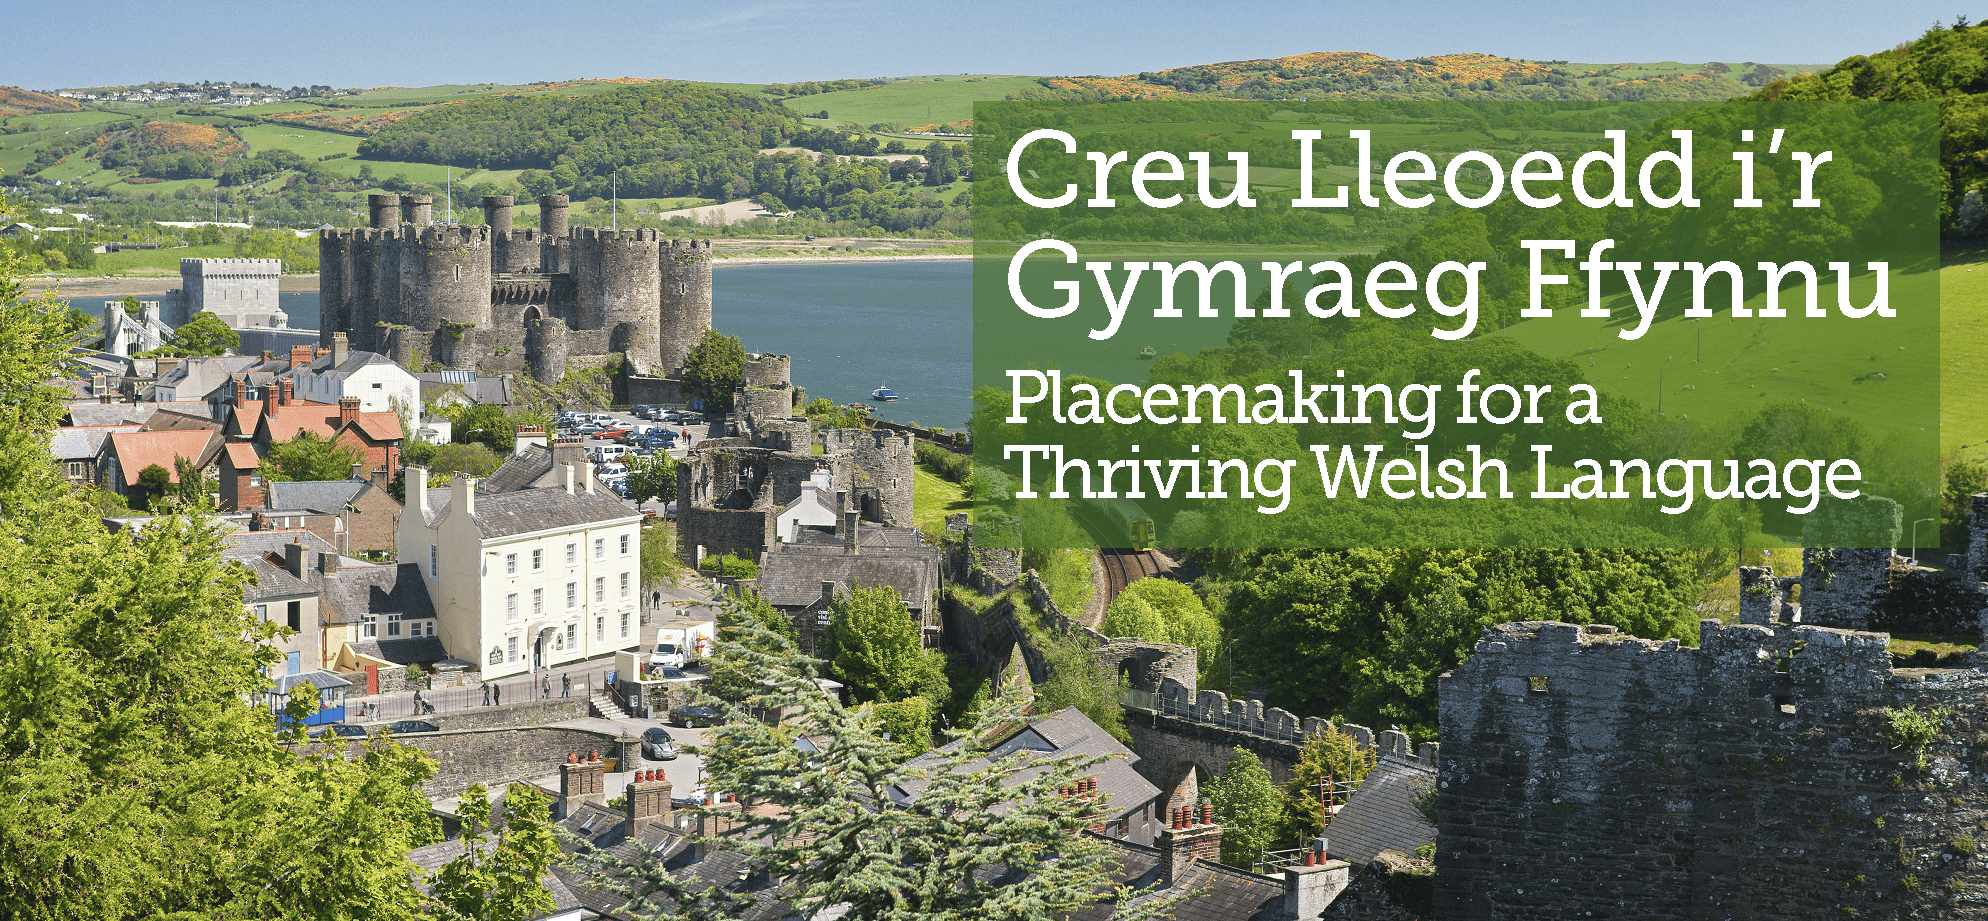 Placemaking for a Thriving Welsh Language